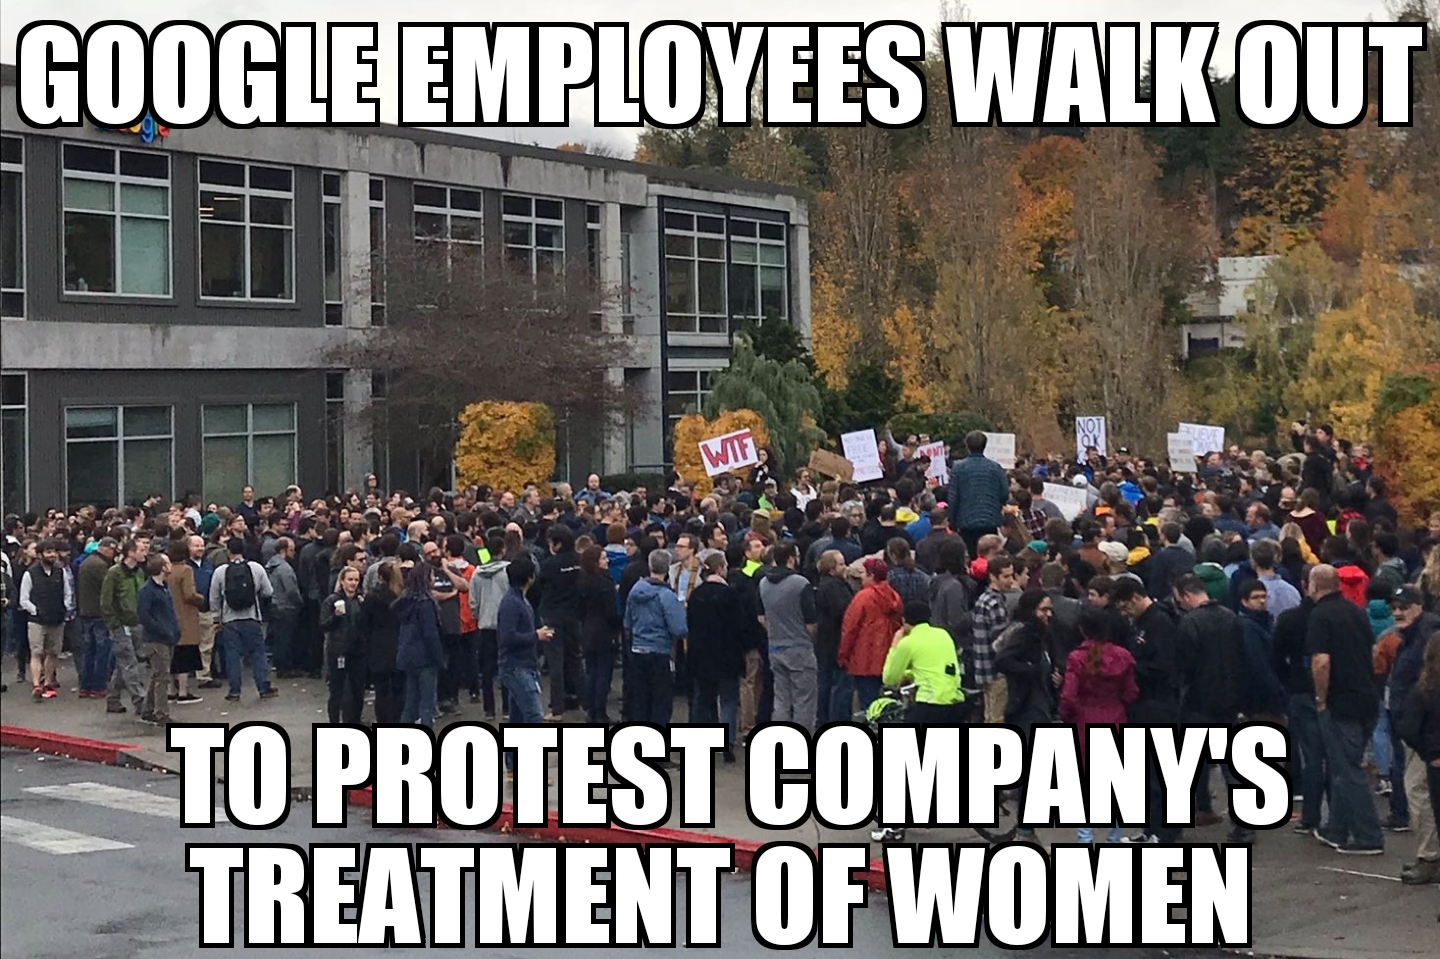 Google employees walk out over treatment of women